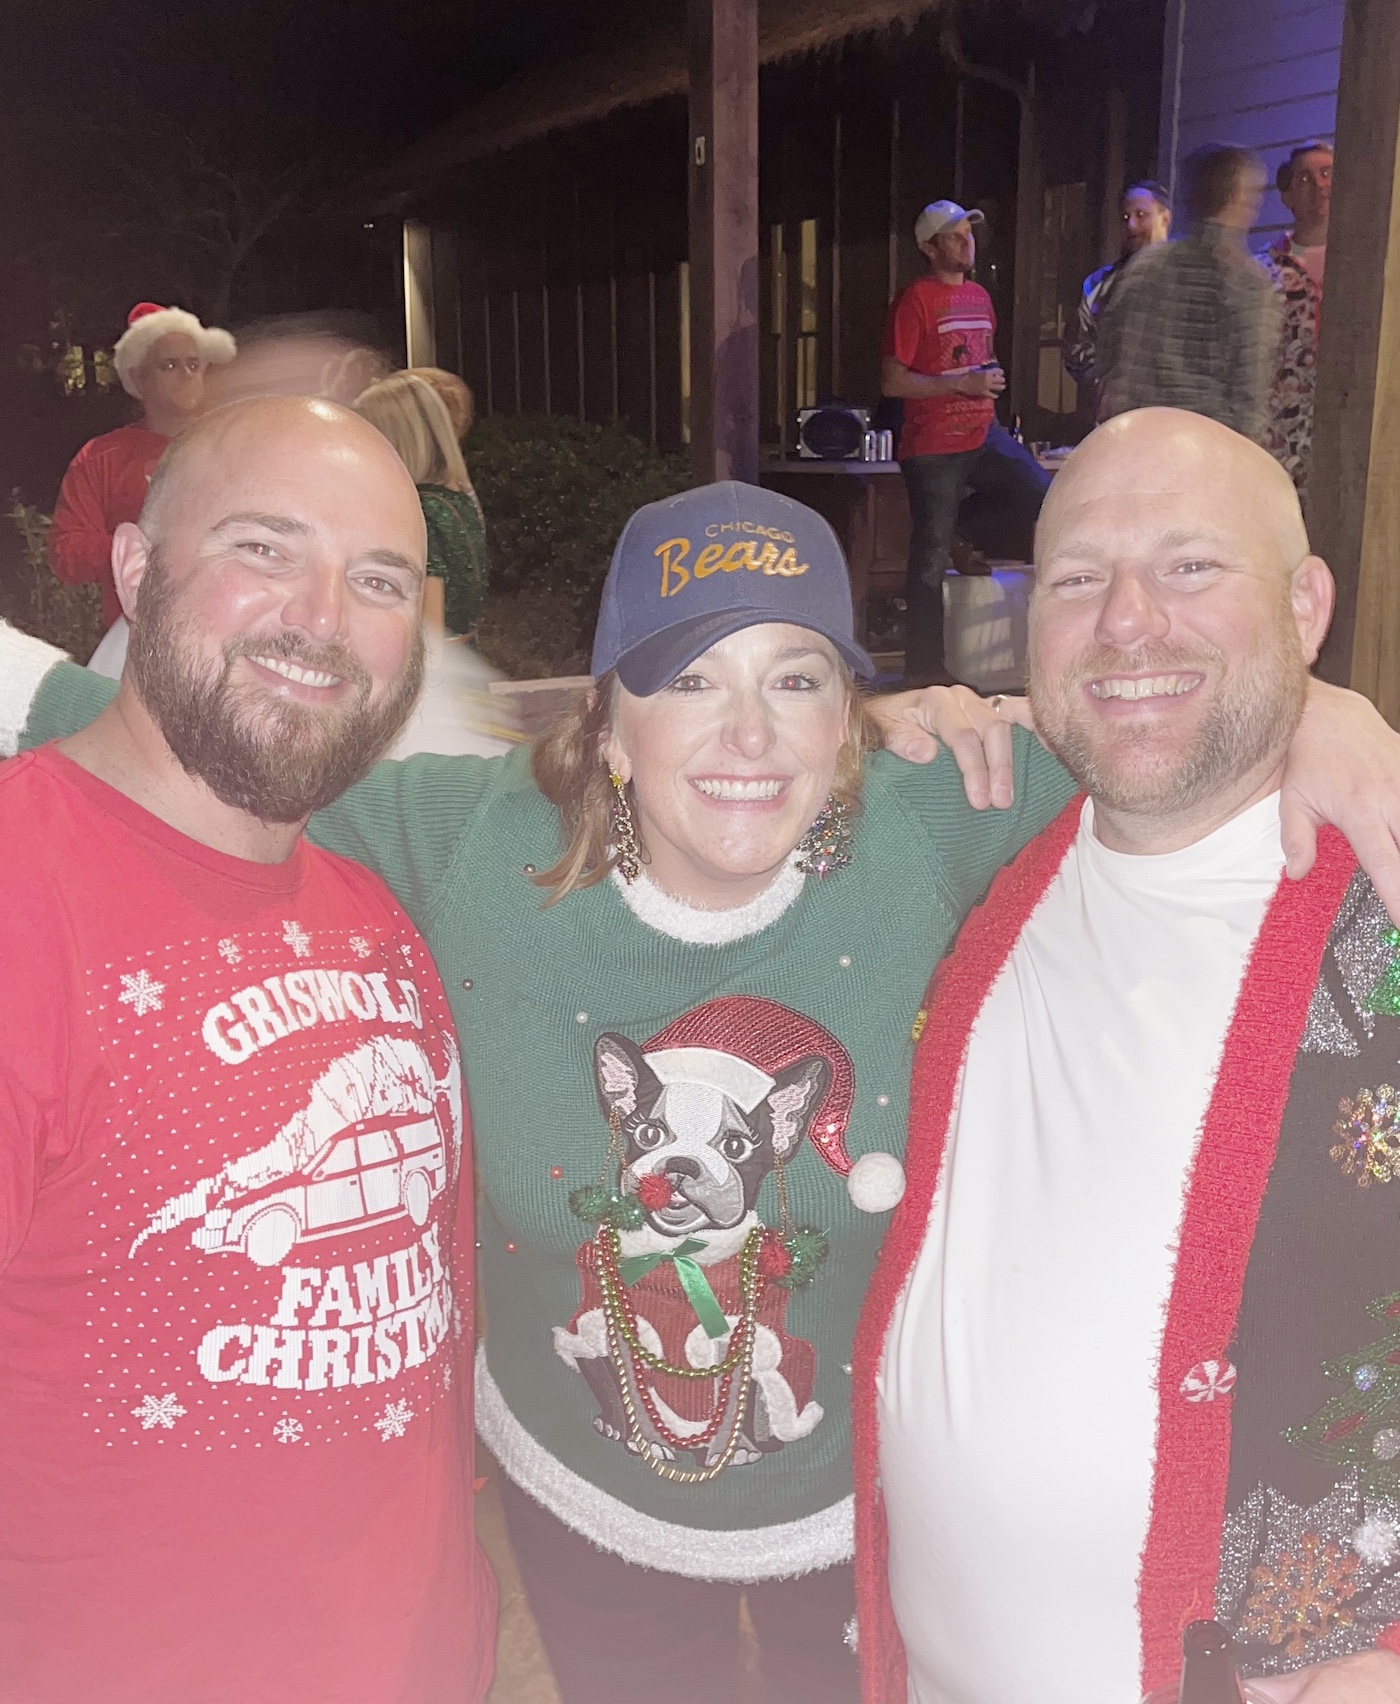 Christmas With Cousin Eddie // An Annual Griswold Christmas Vacation celebration